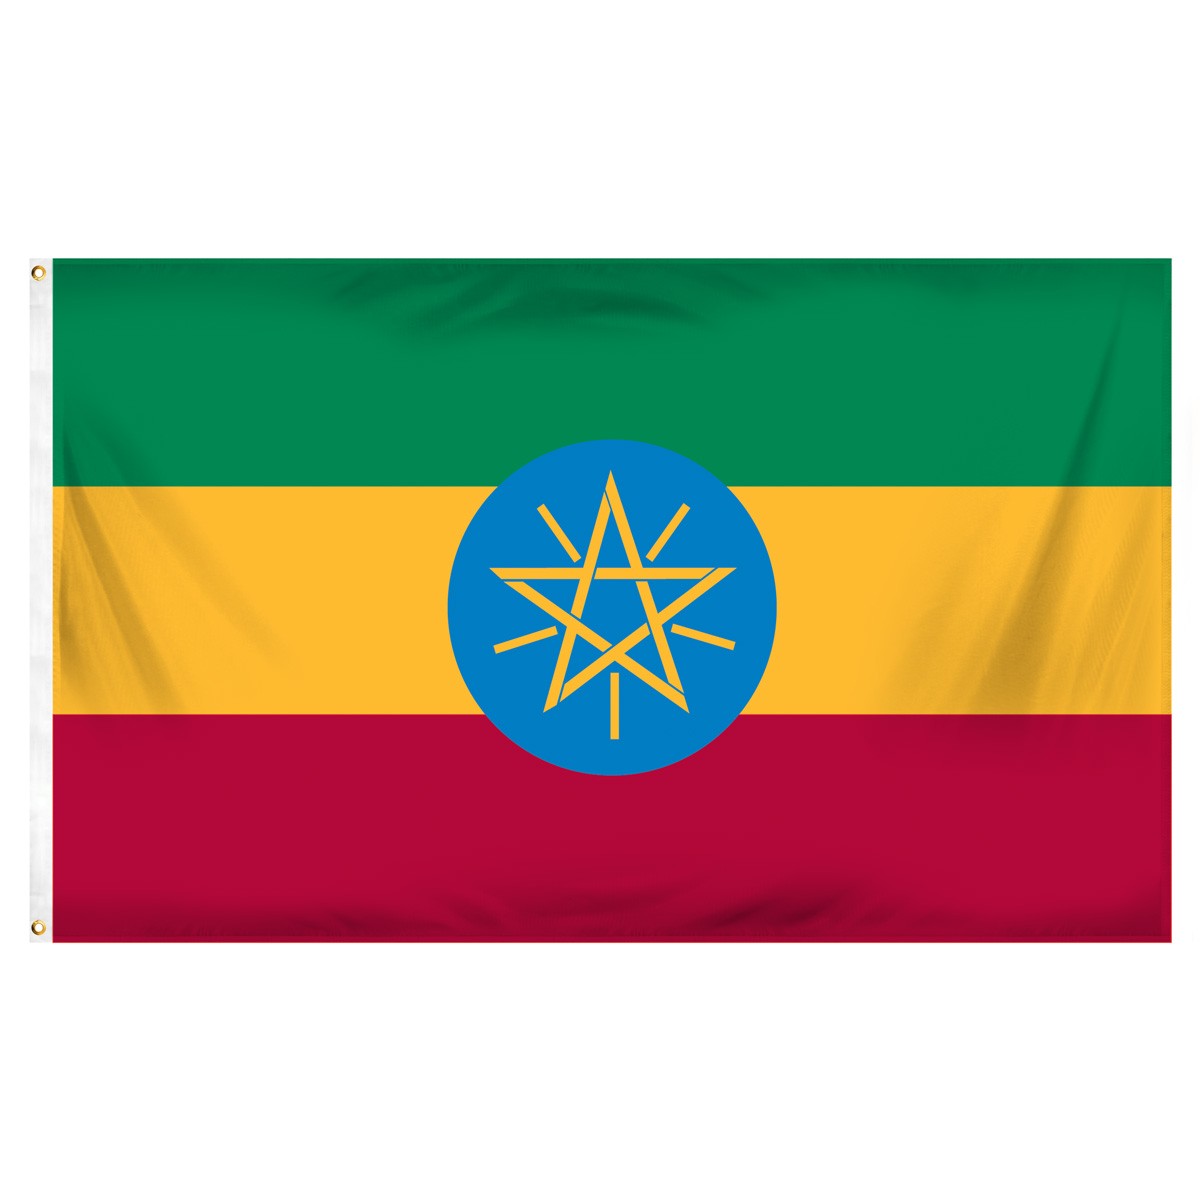 Ethiopia Building Pennants and Flags